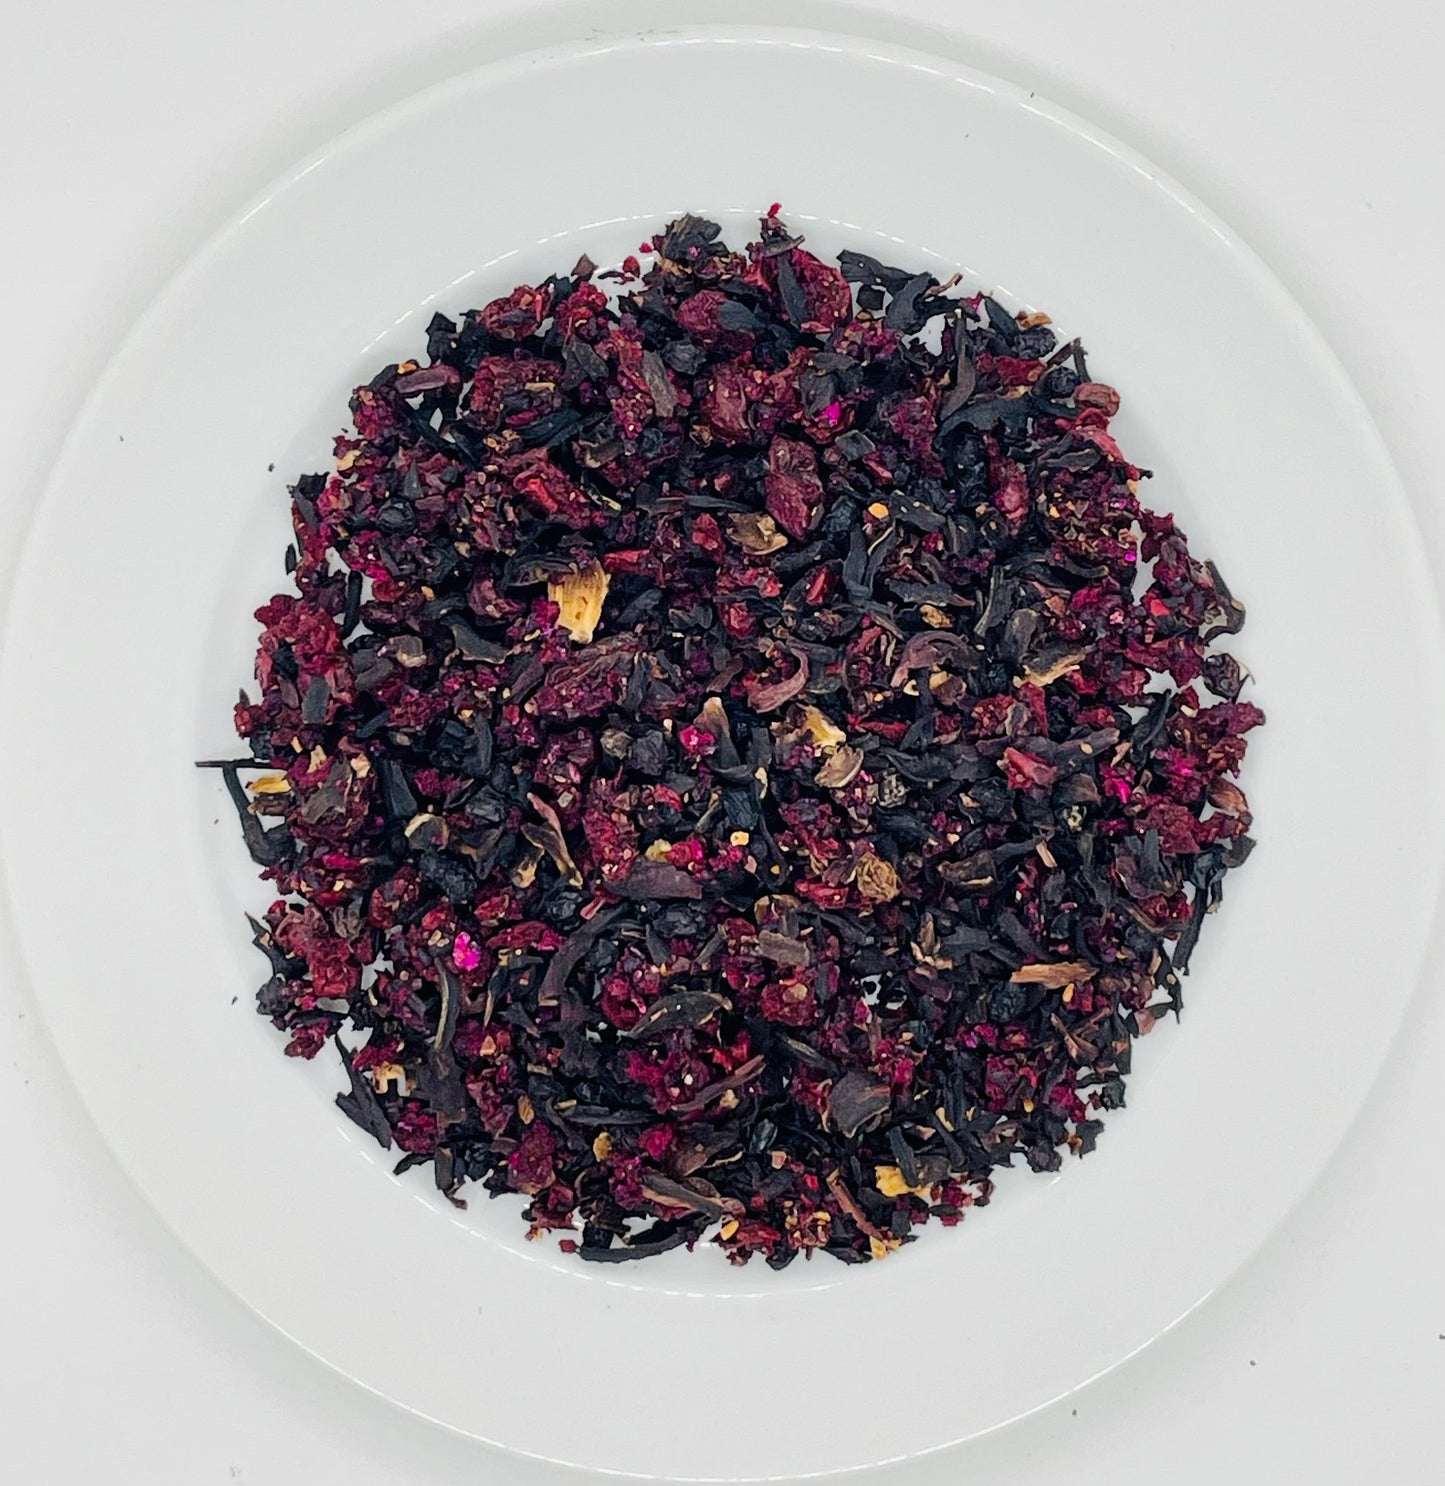 Image of a Black Cherry Berry tea blend on a ceramic plate with colourful dry fruit and berries